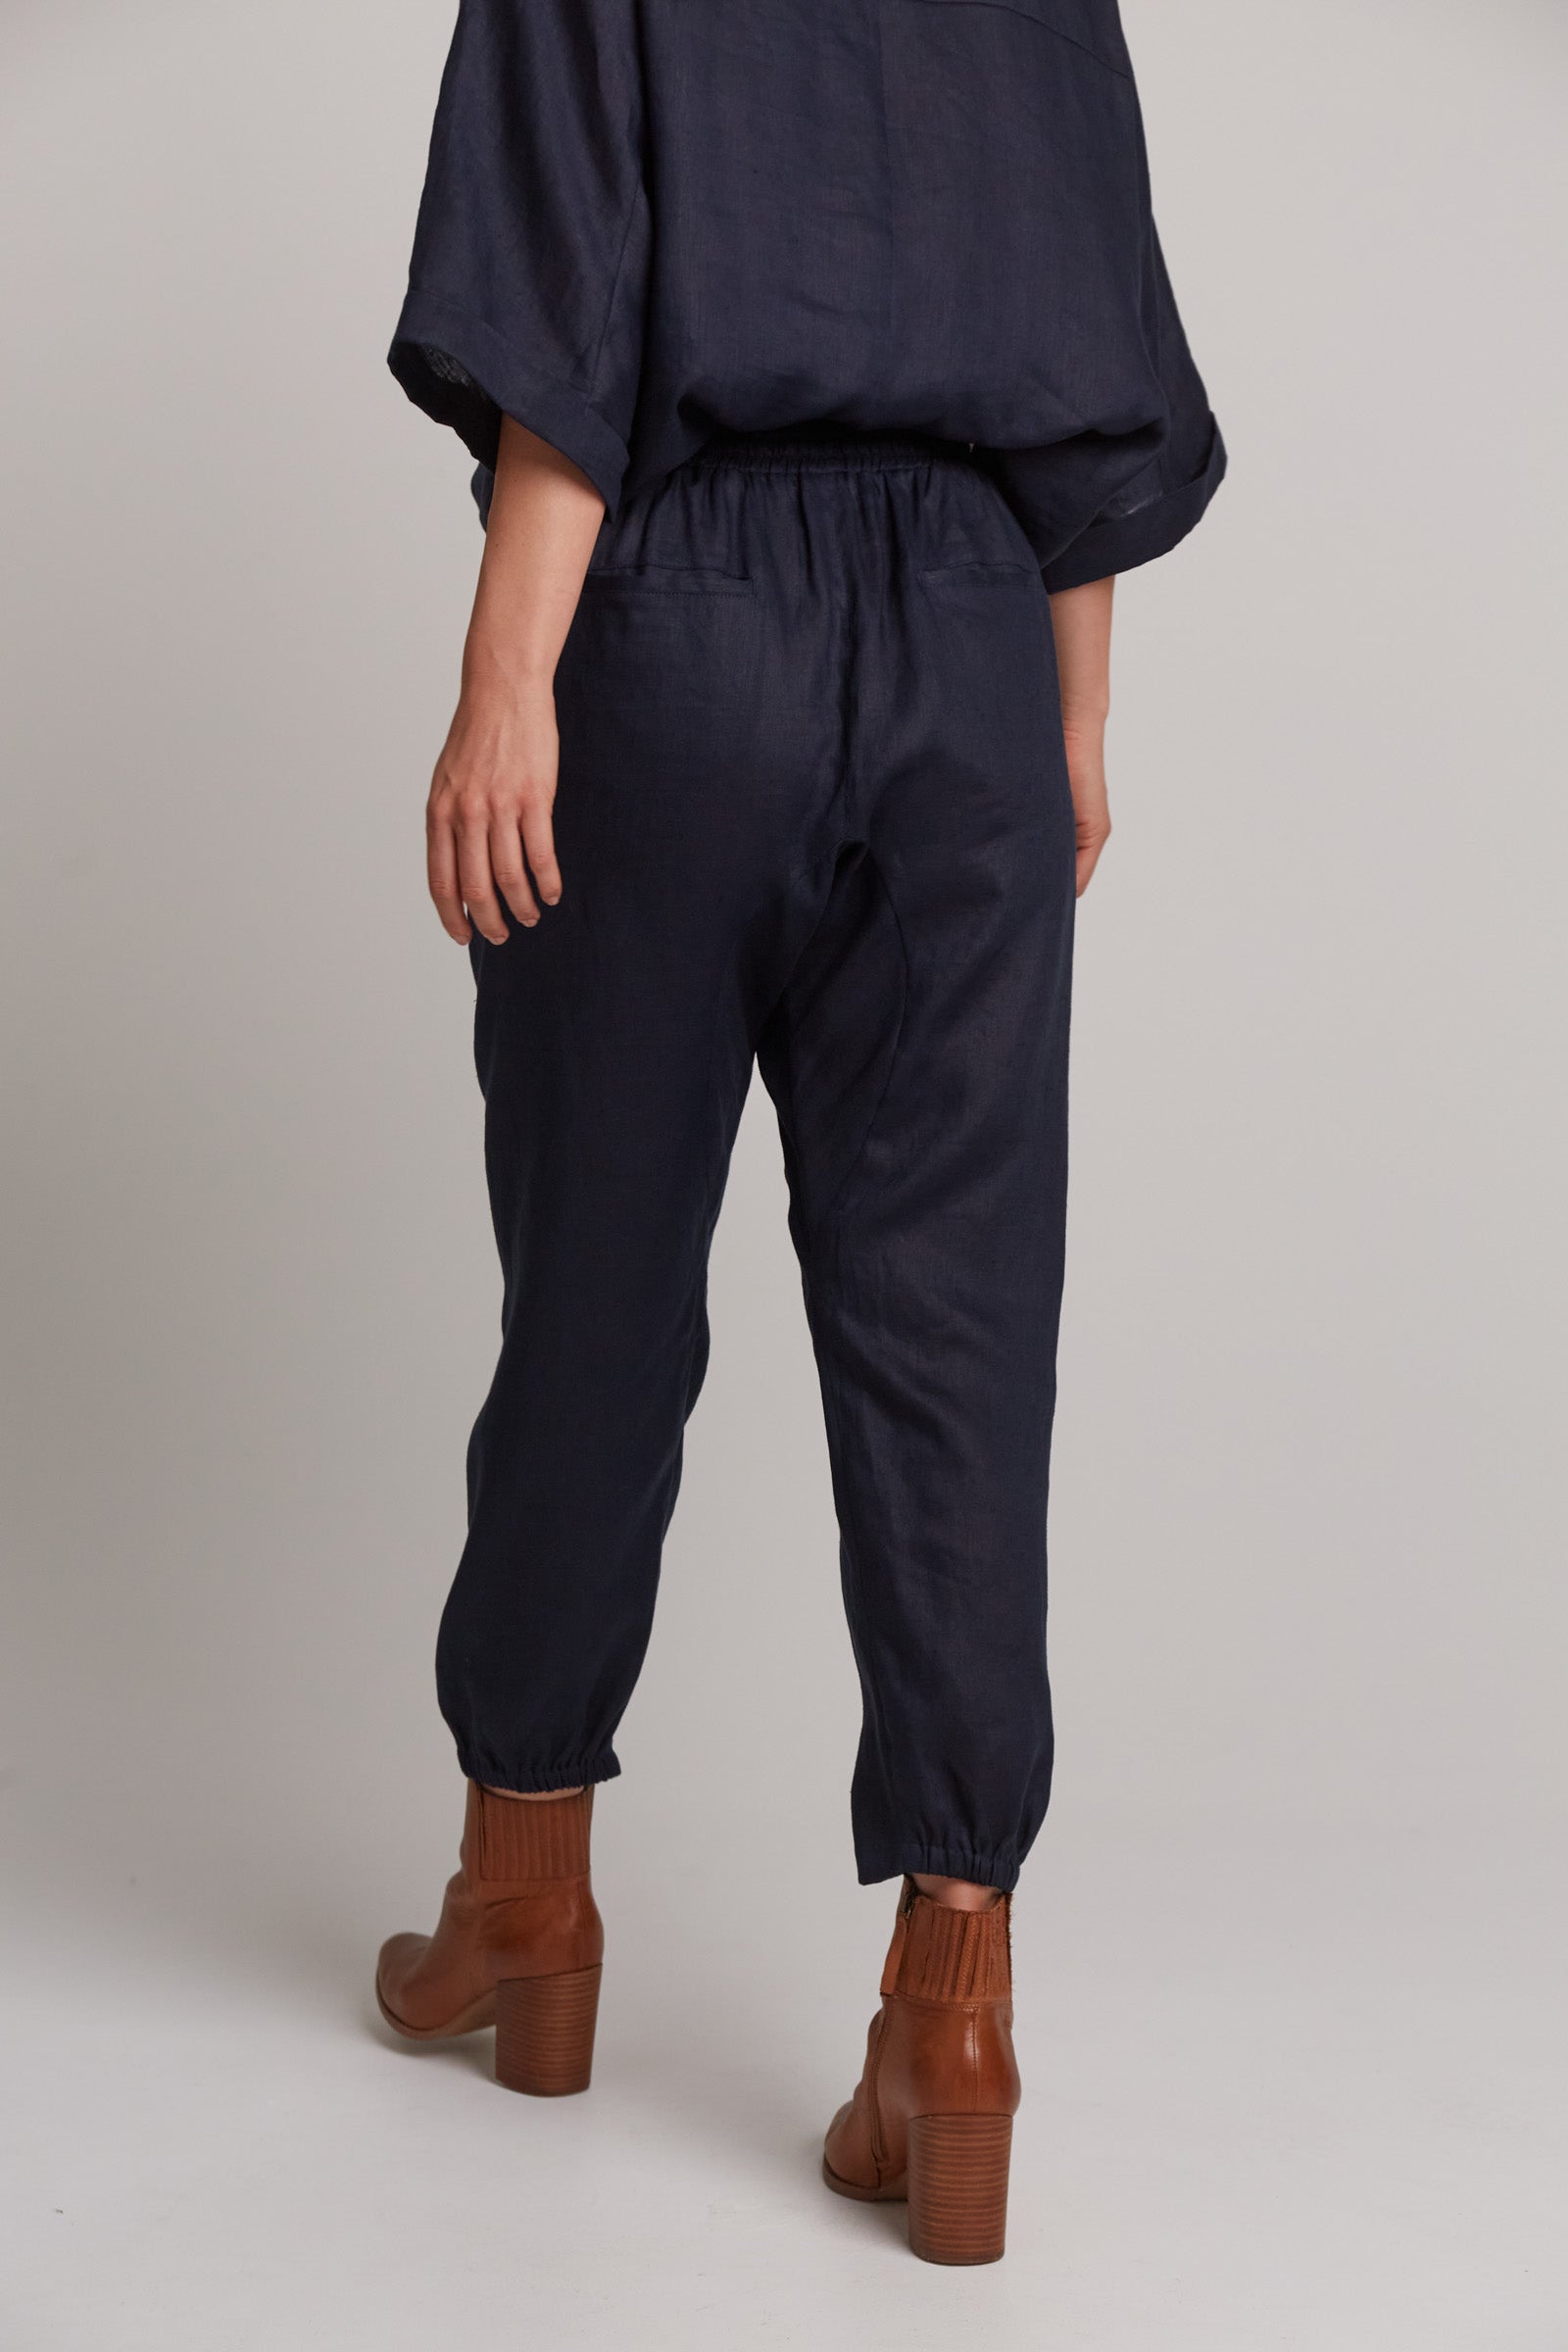 Studio Relaxed Pant - Navy - eb&ive Clothing - Pant Relaxed Linen